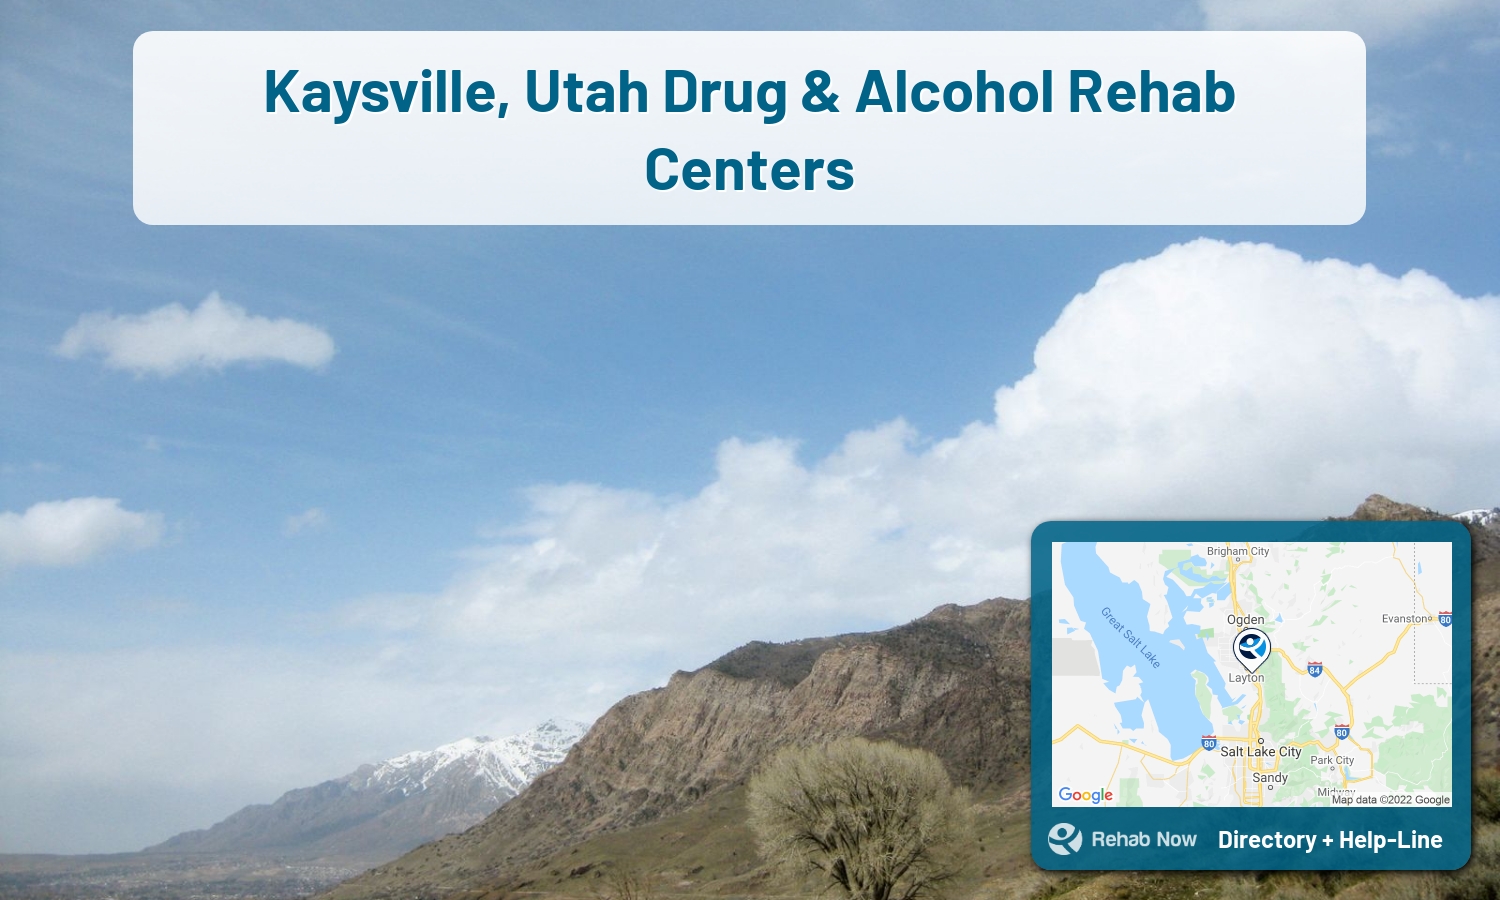 Ready to pick a rehab center in Kaysville? Get off alcohol, opiates, and other drugs, by selecting top drug rehab centers in Utah